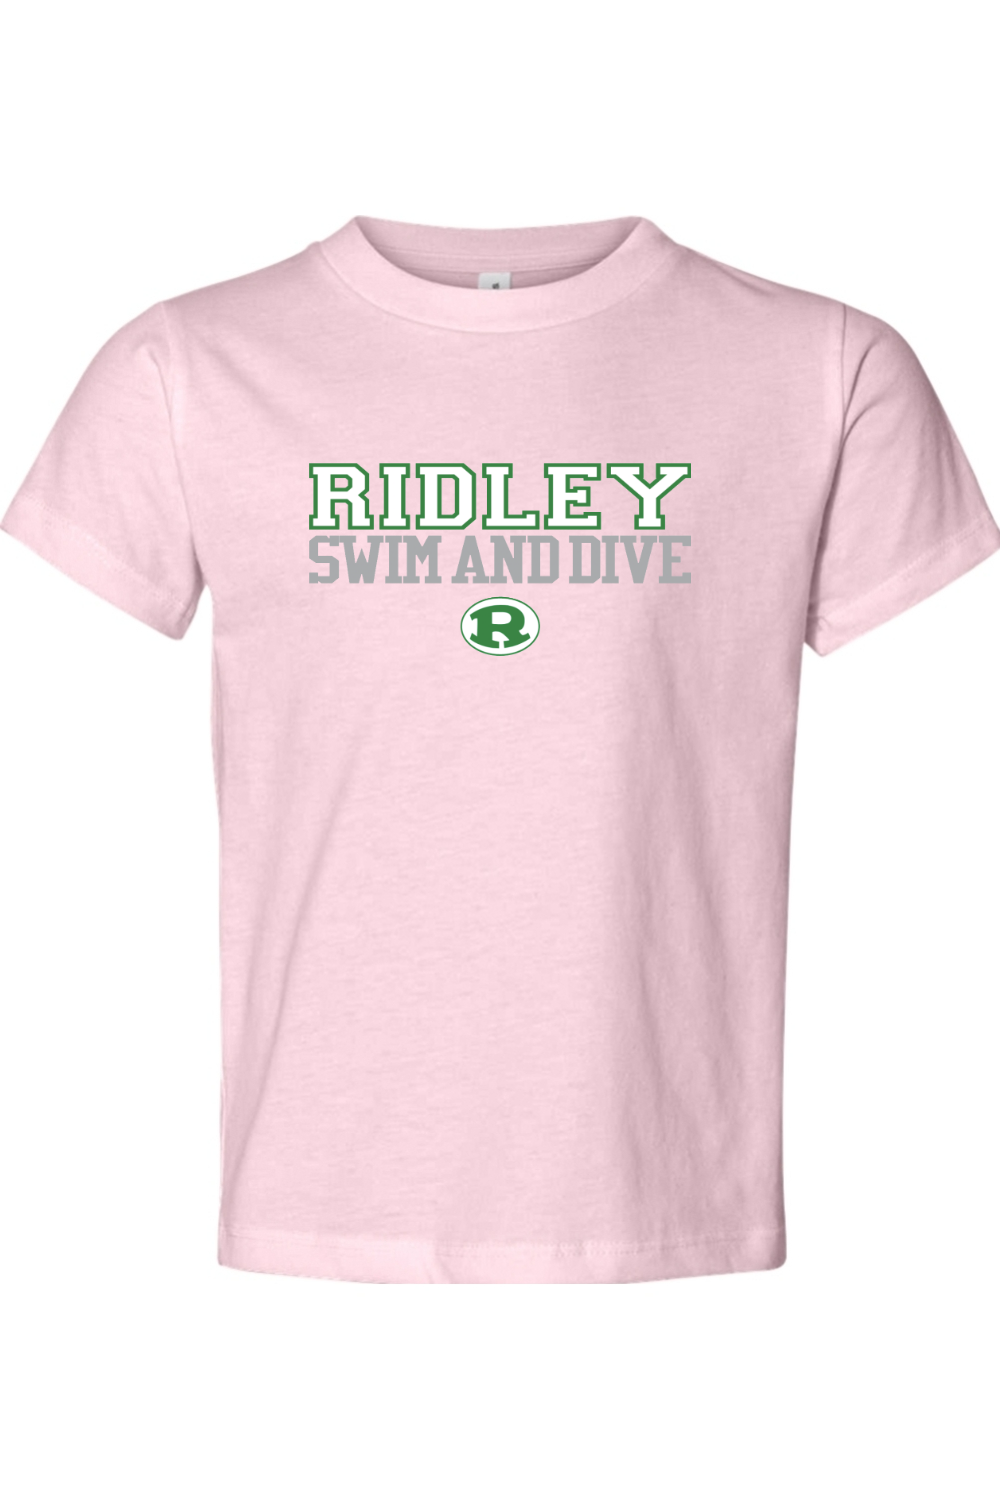 Ridley Swim and Dive Toddler Jersey Tee